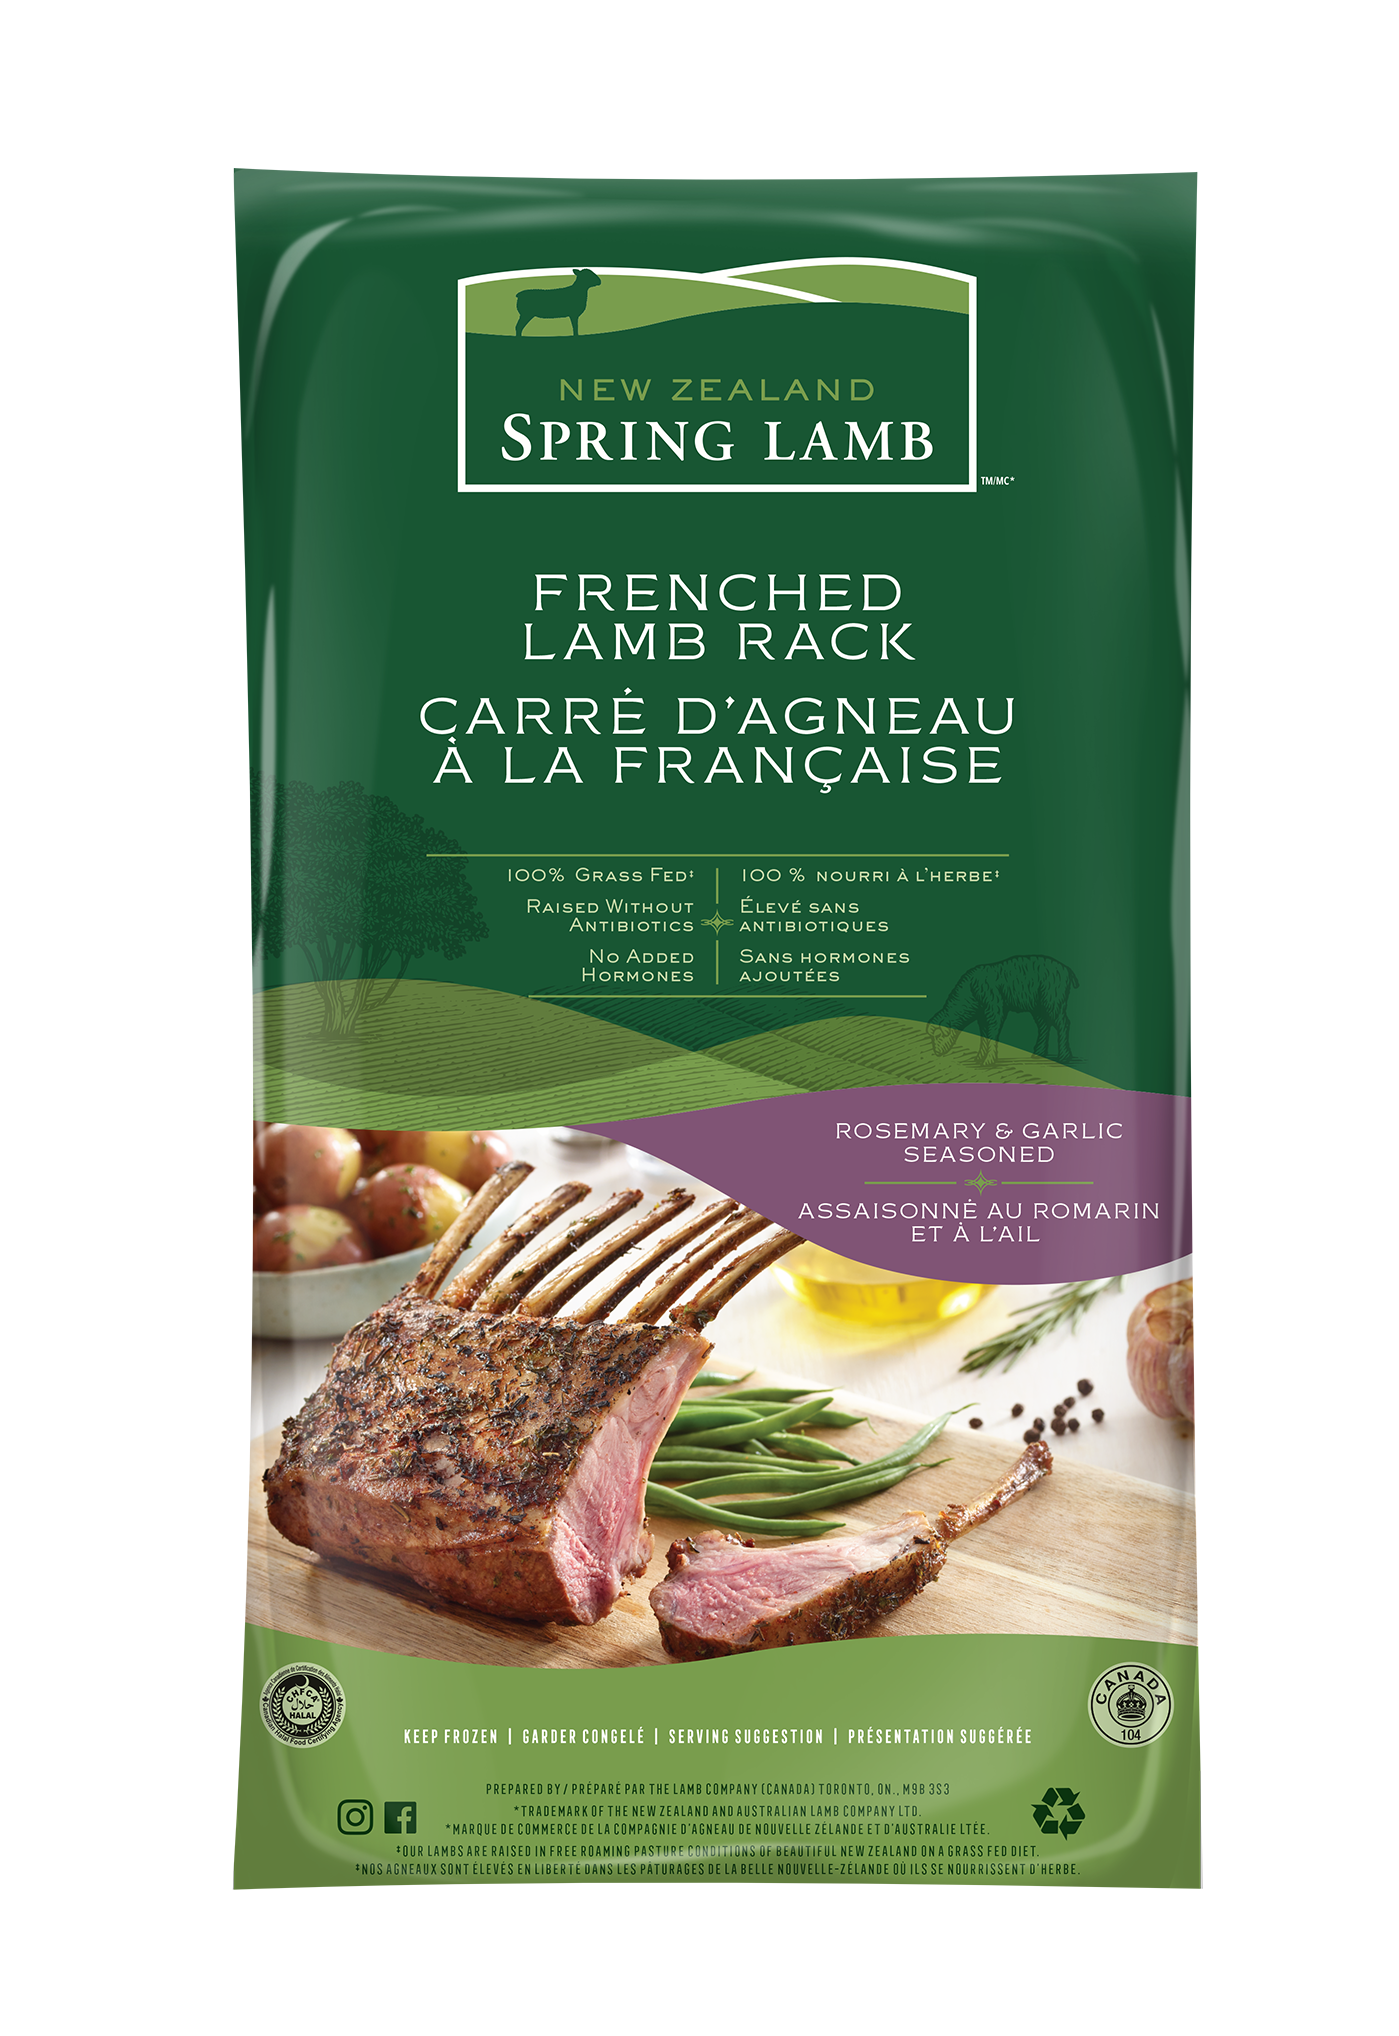 Frenched Lamb Rack Packaging